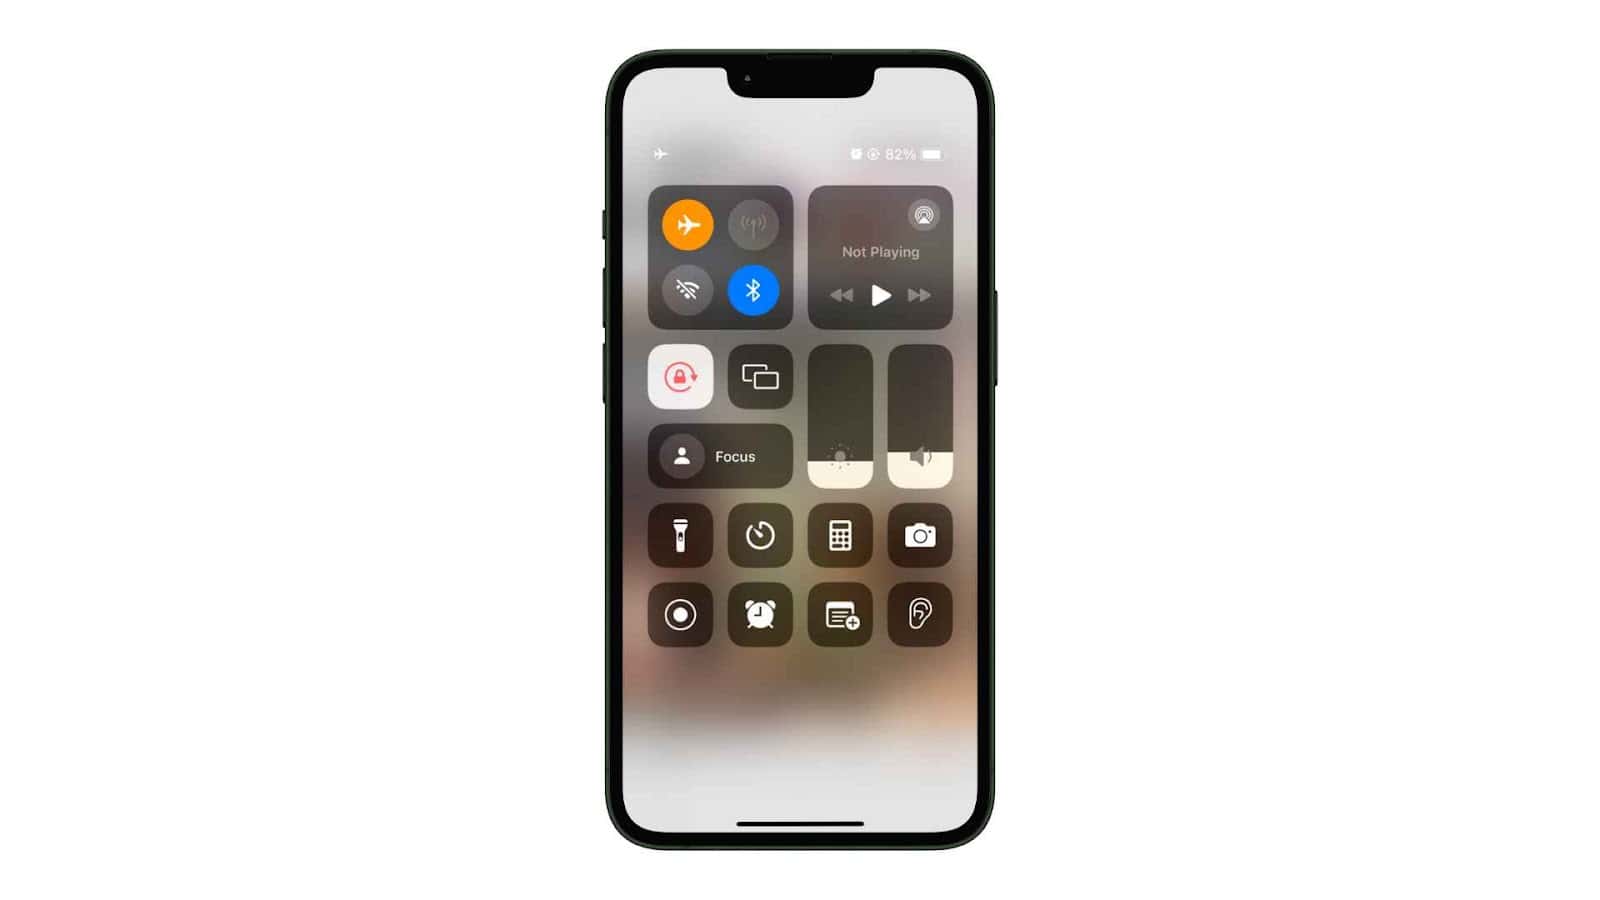 How to View Instagram Stories Without Them Knowing - A smartphone showing a control center with various icons for settings like Wi-Fi, Bluetooth and Flight Mode.